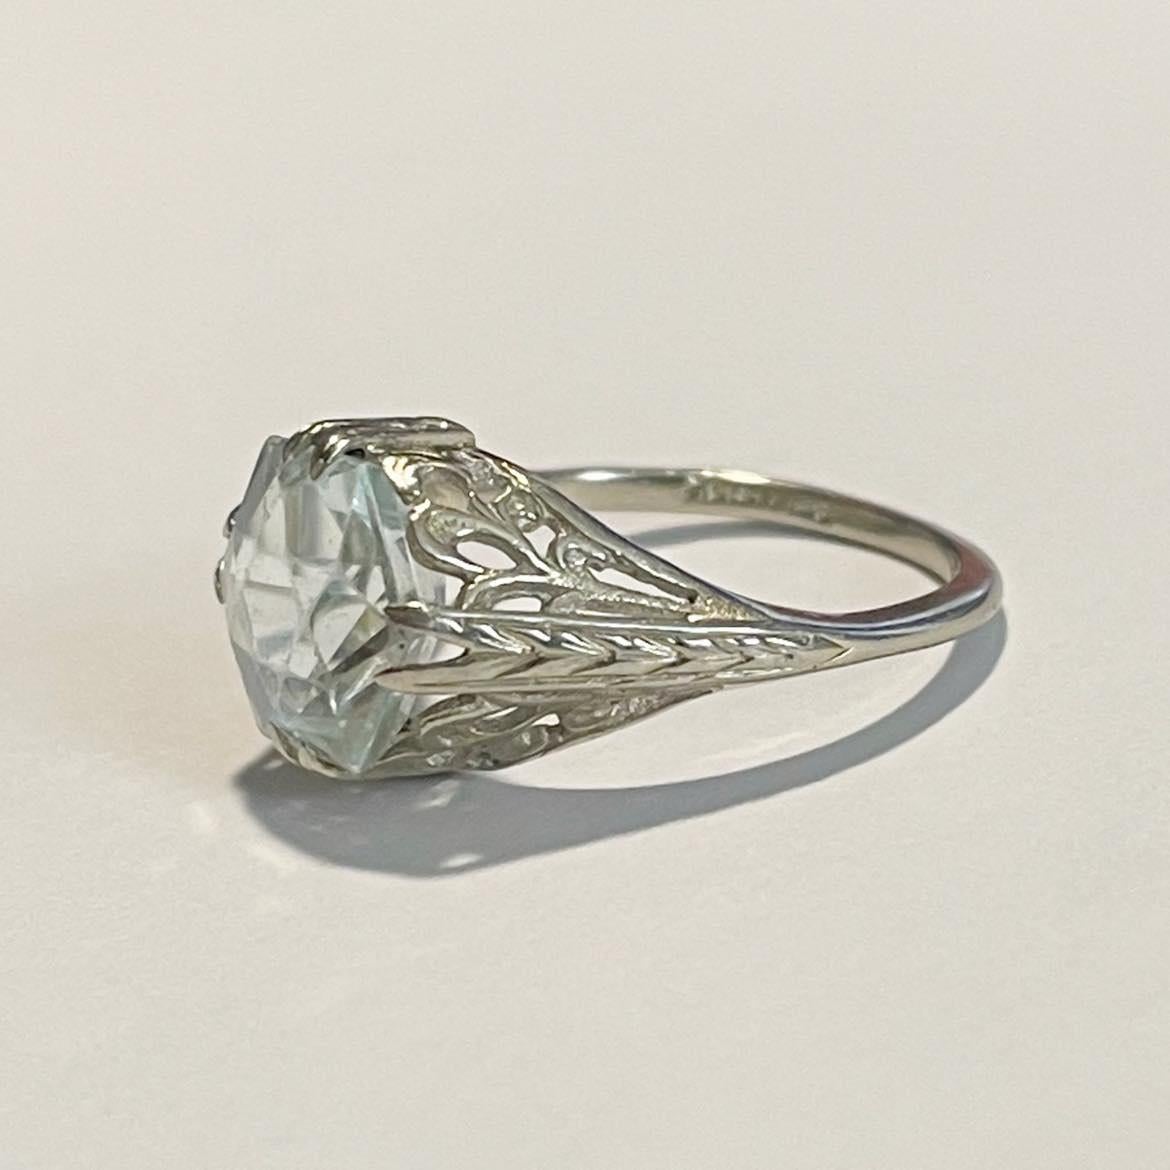 This unique blossom is a stunner. Crafted in 14K white gold the open filigree work of the mount matches perfectly with the hexagonal cut of the sky blue aquamarine. The shape of this gem is unique and beautiful. Rising in popularity in the Art Deco